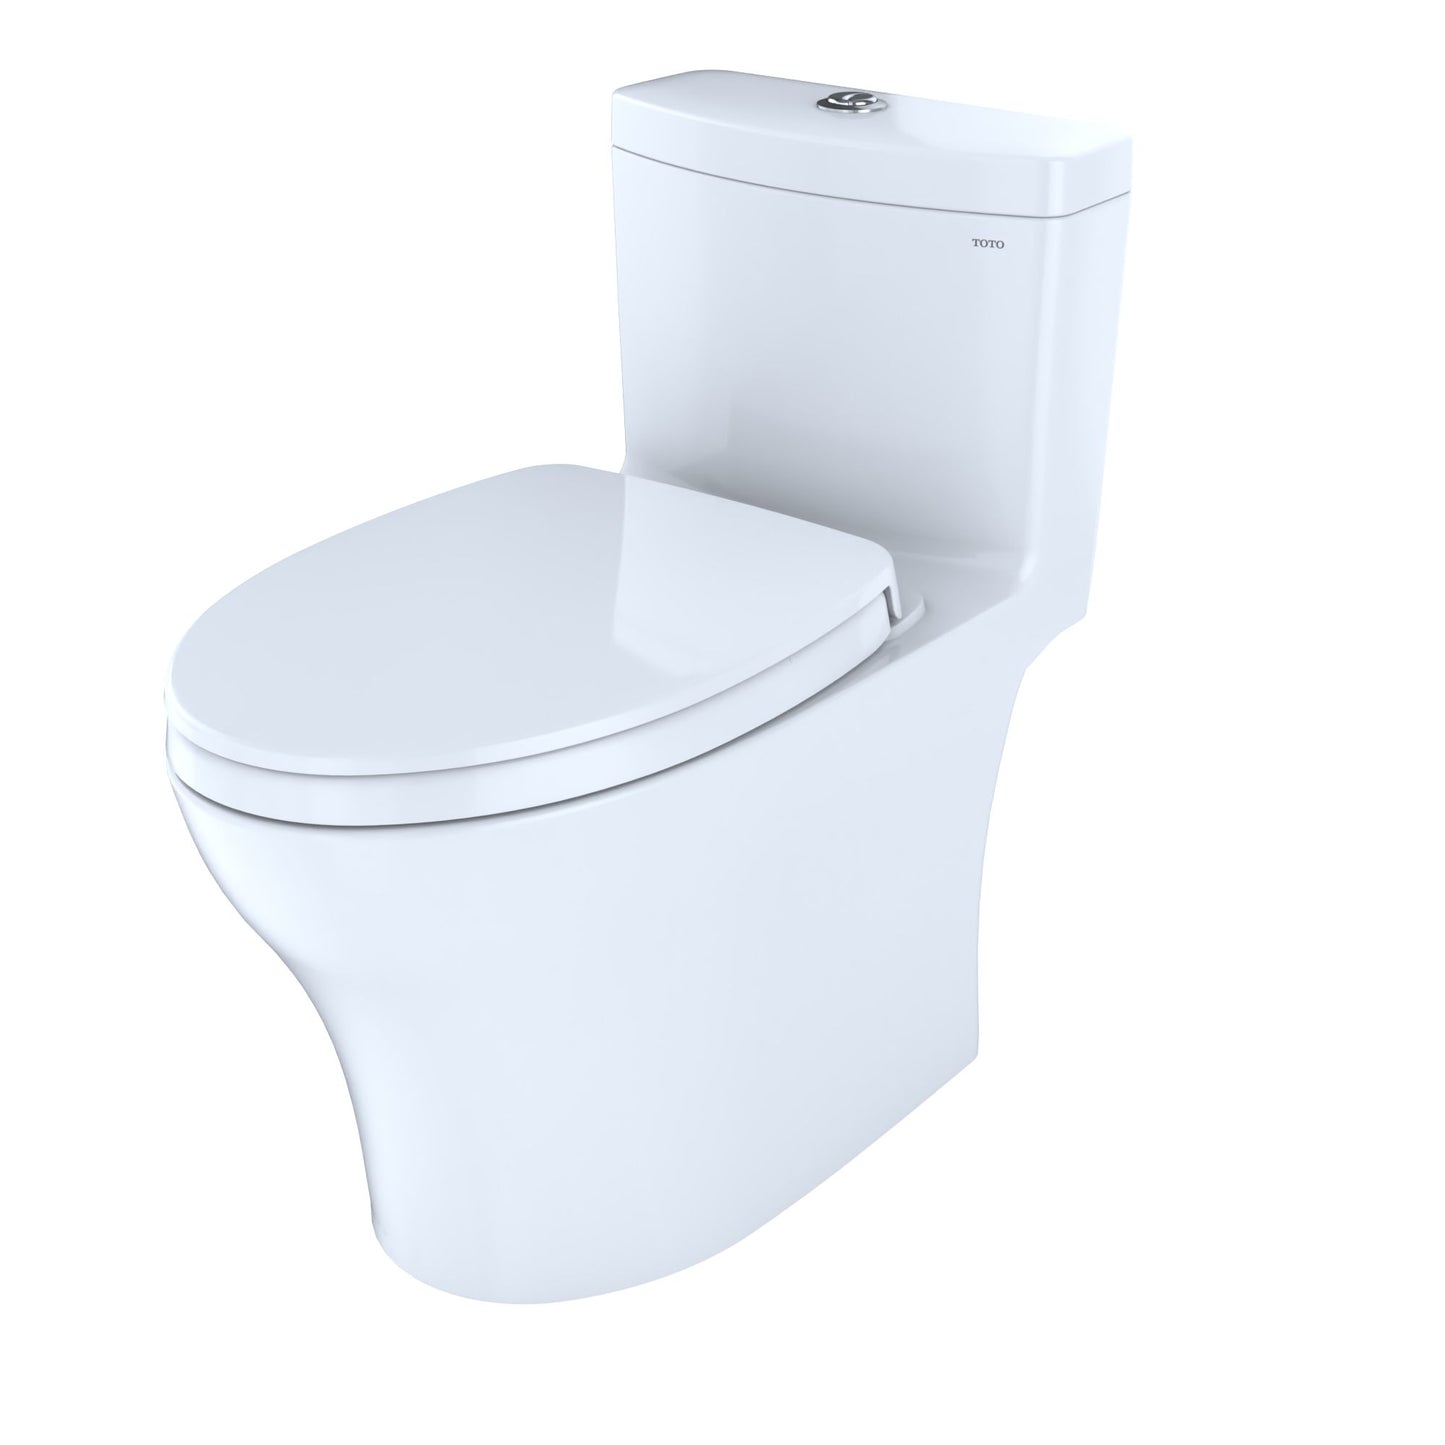 Toto Aquia IV One Piece Toilet 1.28 GPF & 0.8 GPF Elongated Bowl Washlet+ Connection Height 28.13" Seat Height 17.62 White